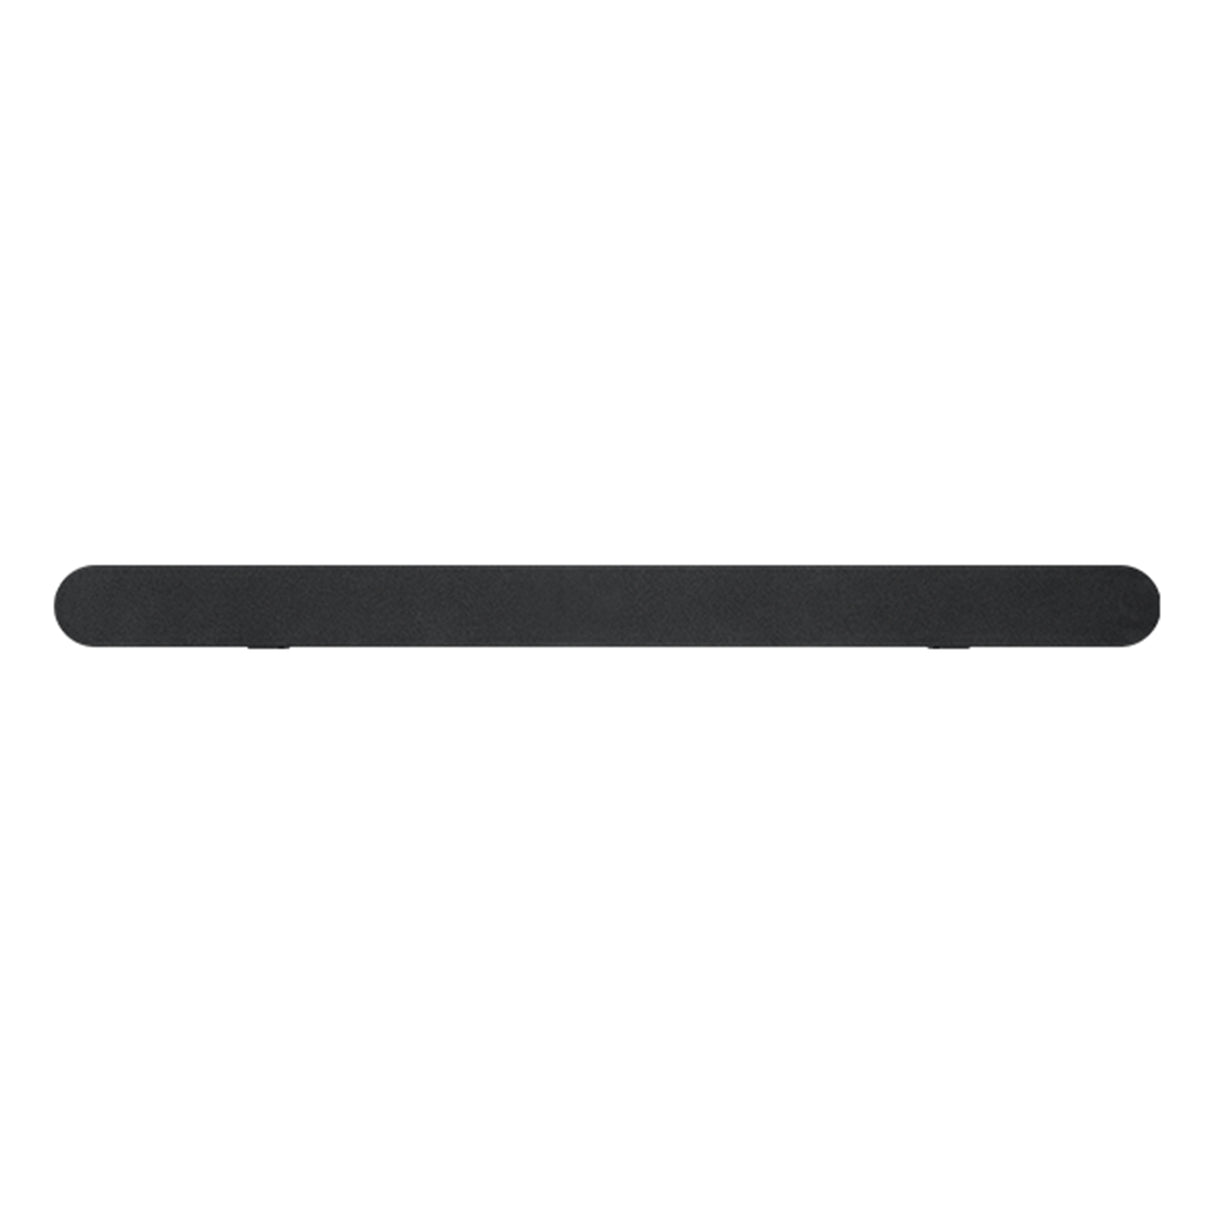 TCL TS6110 - 2.1 Channel Sound Bar with Wireless Subwoofer